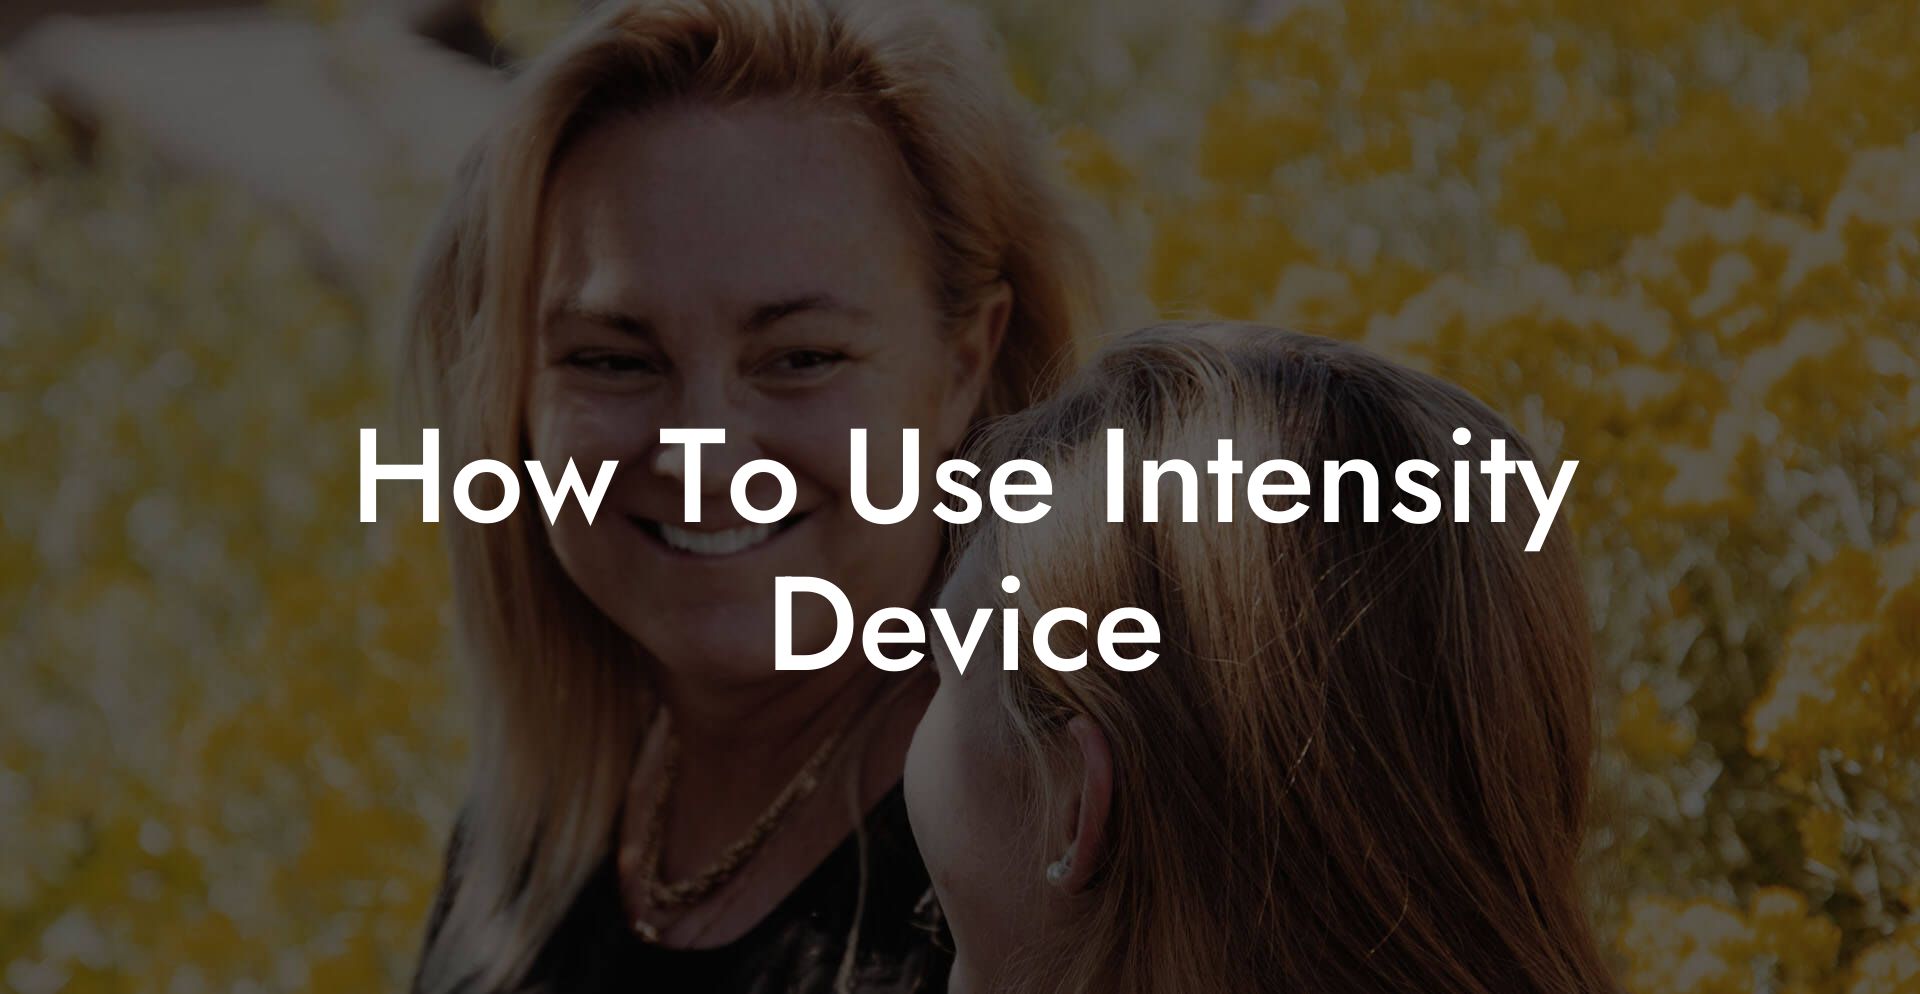 How To Use Intensity Device